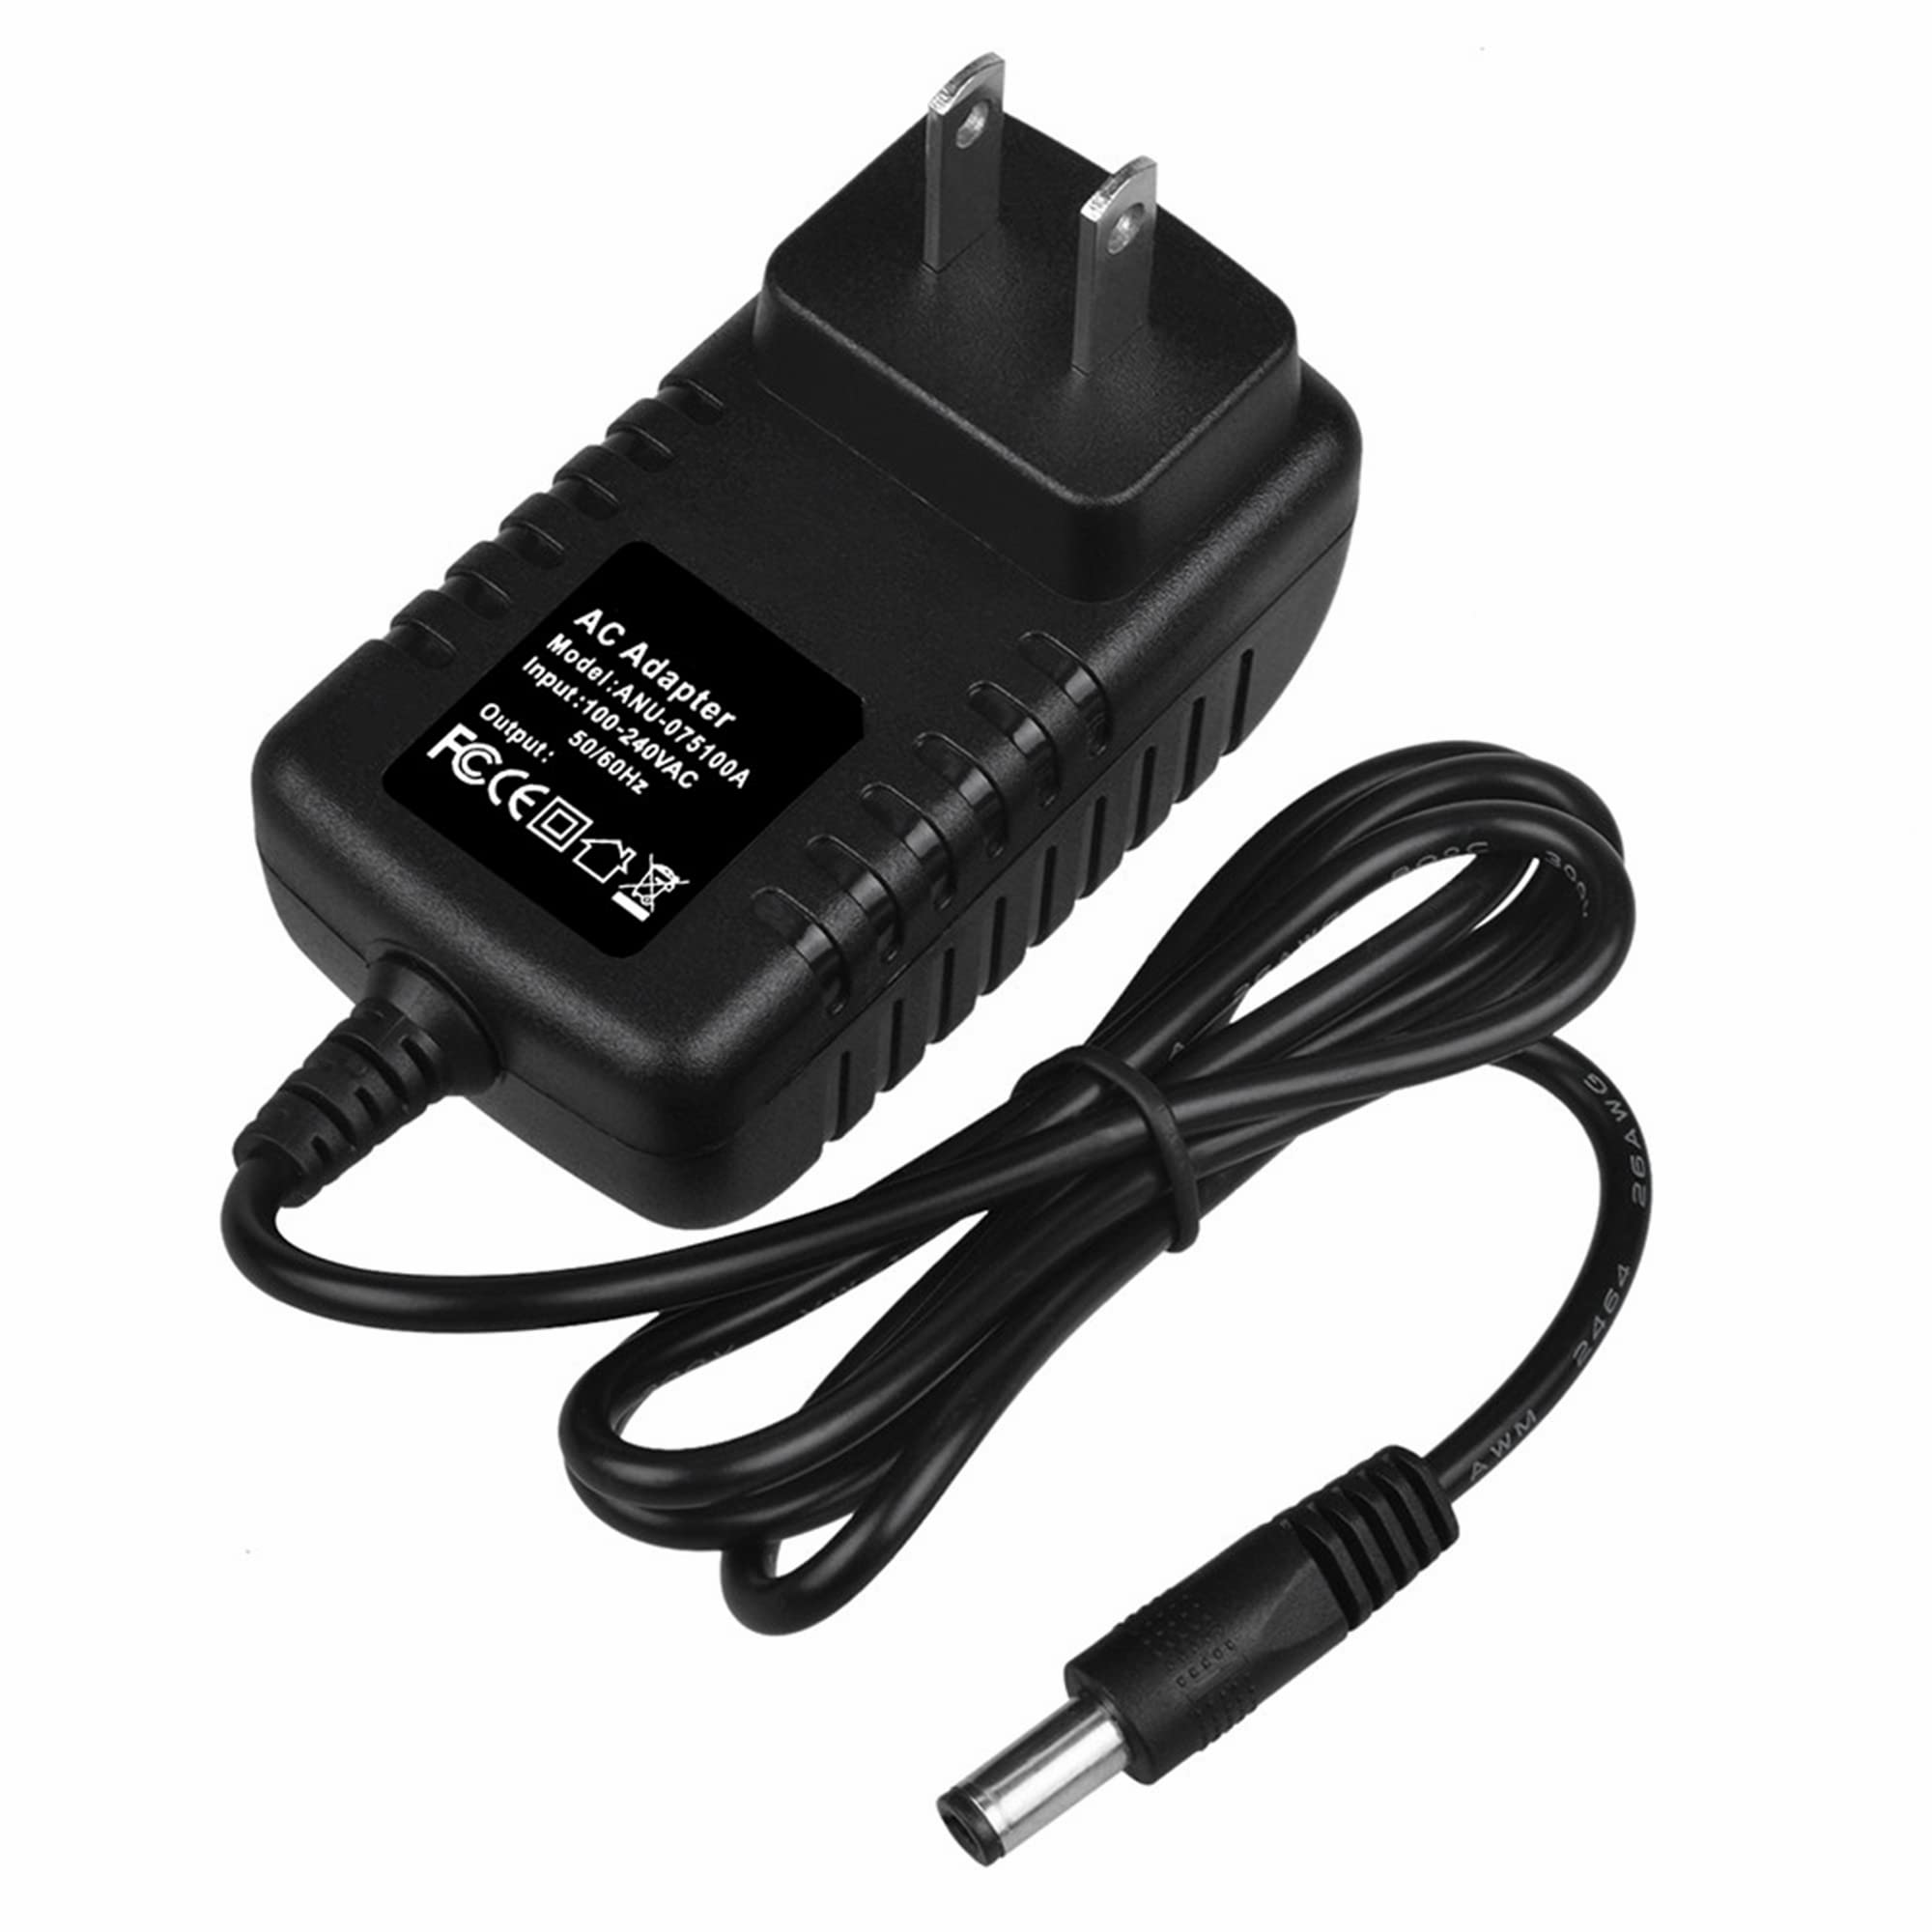 SLLEA 12V 2A AC Adapter Power Replacement for Petsafe Wireless Fence IF-100 Pet Containment System